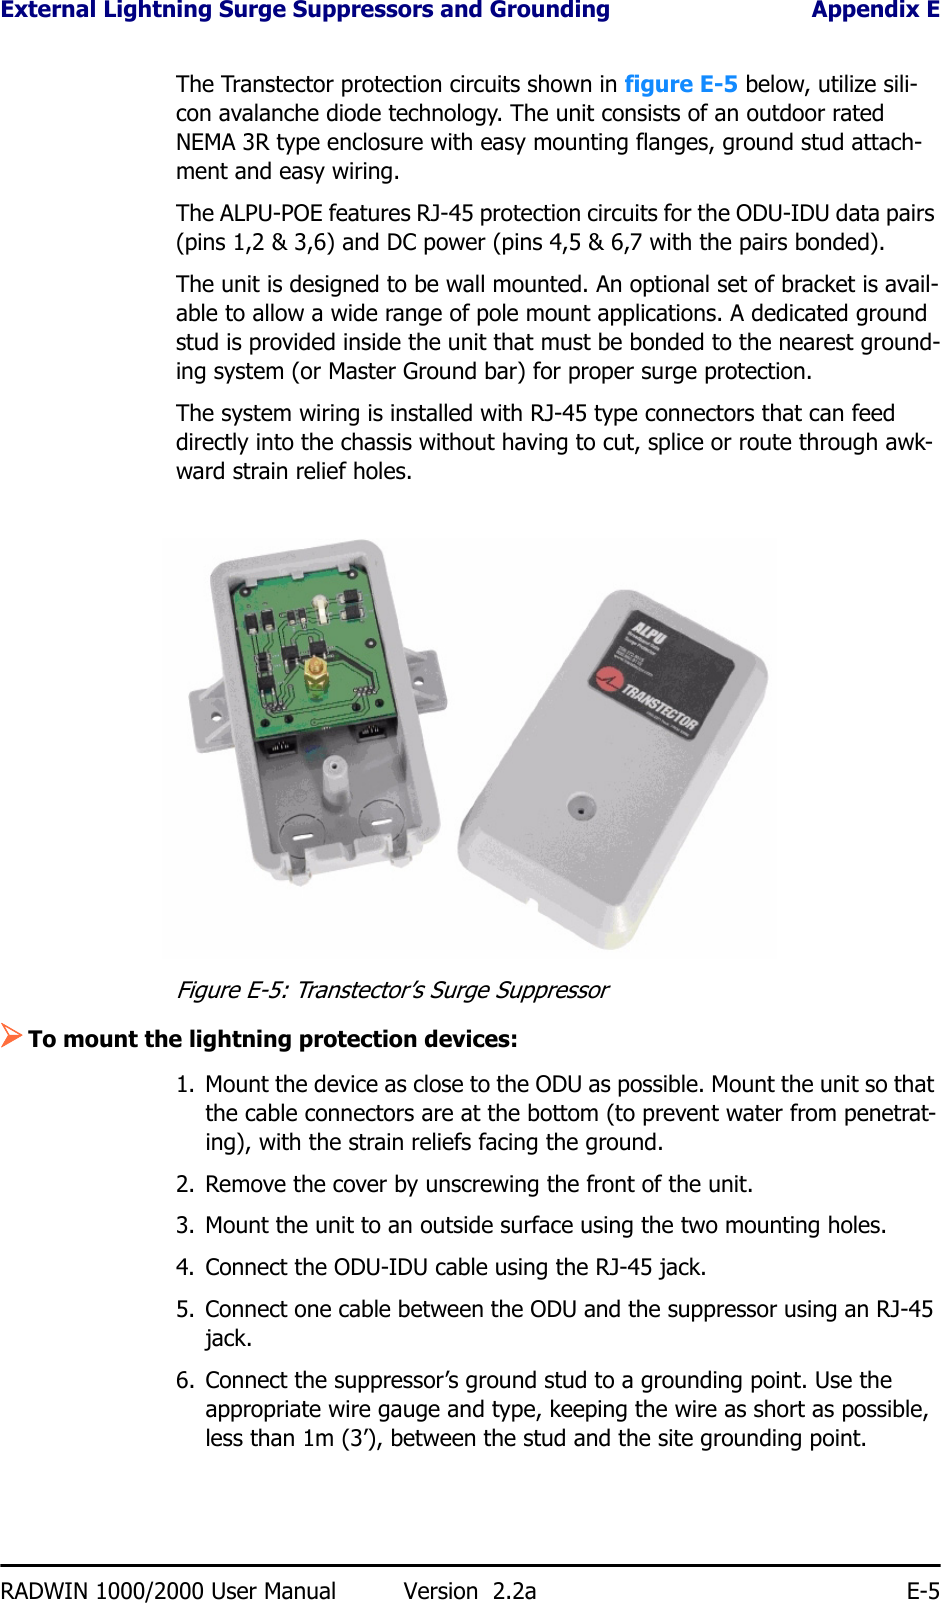 External Lightning Surge Suppressors and Grounding Appendix ERADWIN 1000/2000 User Manual Version  2.2a E-5The Transtector protection circuits shown in figure E-5 below, utilize sili-con avalanche diode technology. The unit consists of an outdoor rated NEMA 3R type enclosure with easy mounting flanges, ground stud attach-ment and easy wiring.The ALPU-POE features RJ-45 protection circuits for the ODU-IDU data pairs (pins 1,2 &amp; 3,6) and DC power (pins 4,5 &amp; 6,7 with the pairs bonded).The unit is designed to be wall mounted. An optional set of bracket is avail-able to allow a wide range of pole mount applications. A dedicated ground stud is provided inside the unit that must be bonded to the nearest ground-ing system (or Master Ground bar) for proper surge protection.The system wiring is installed with RJ-45 type connectors that can feed directly into the chassis without having to cut, splice or route through awk-ward strain relief holes.Figure E-5: Transtector’s Surge Suppressor¾To mount the lightning protection devices:1. Mount the device as close to the ODU as possible. Mount the unit so that the cable connectors are at the bottom (to prevent water from penetrat-ing), with the strain reliefs facing the ground.2. Remove the cover by unscrewing the front of the unit.3. Mount the unit to an outside surface using the two mounting holes.4. Connect the ODU-IDU cable using the RJ-45 jack.5. Connect one cable between the ODU and the suppressor using an RJ-45 jack.6. Connect the suppressor’s ground stud to a grounding point. Use the appropriate wire gauge and type, keeping the wire as short as possible, less than 1m (3’), between the stud and the site grounding point.